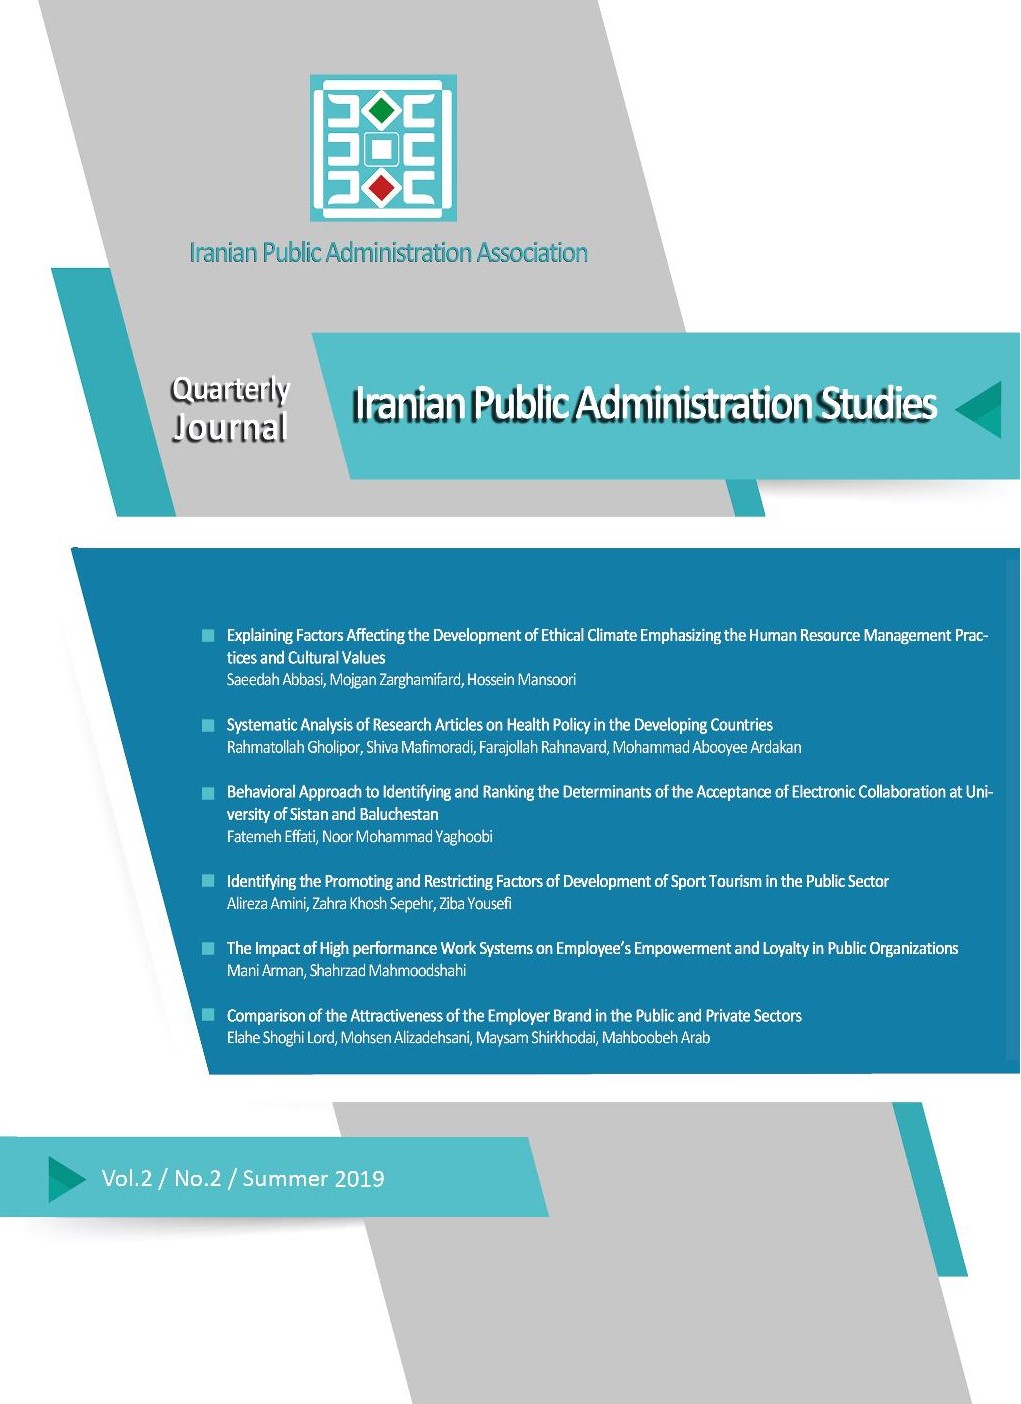 Journal of Iranian Public Administration Studies